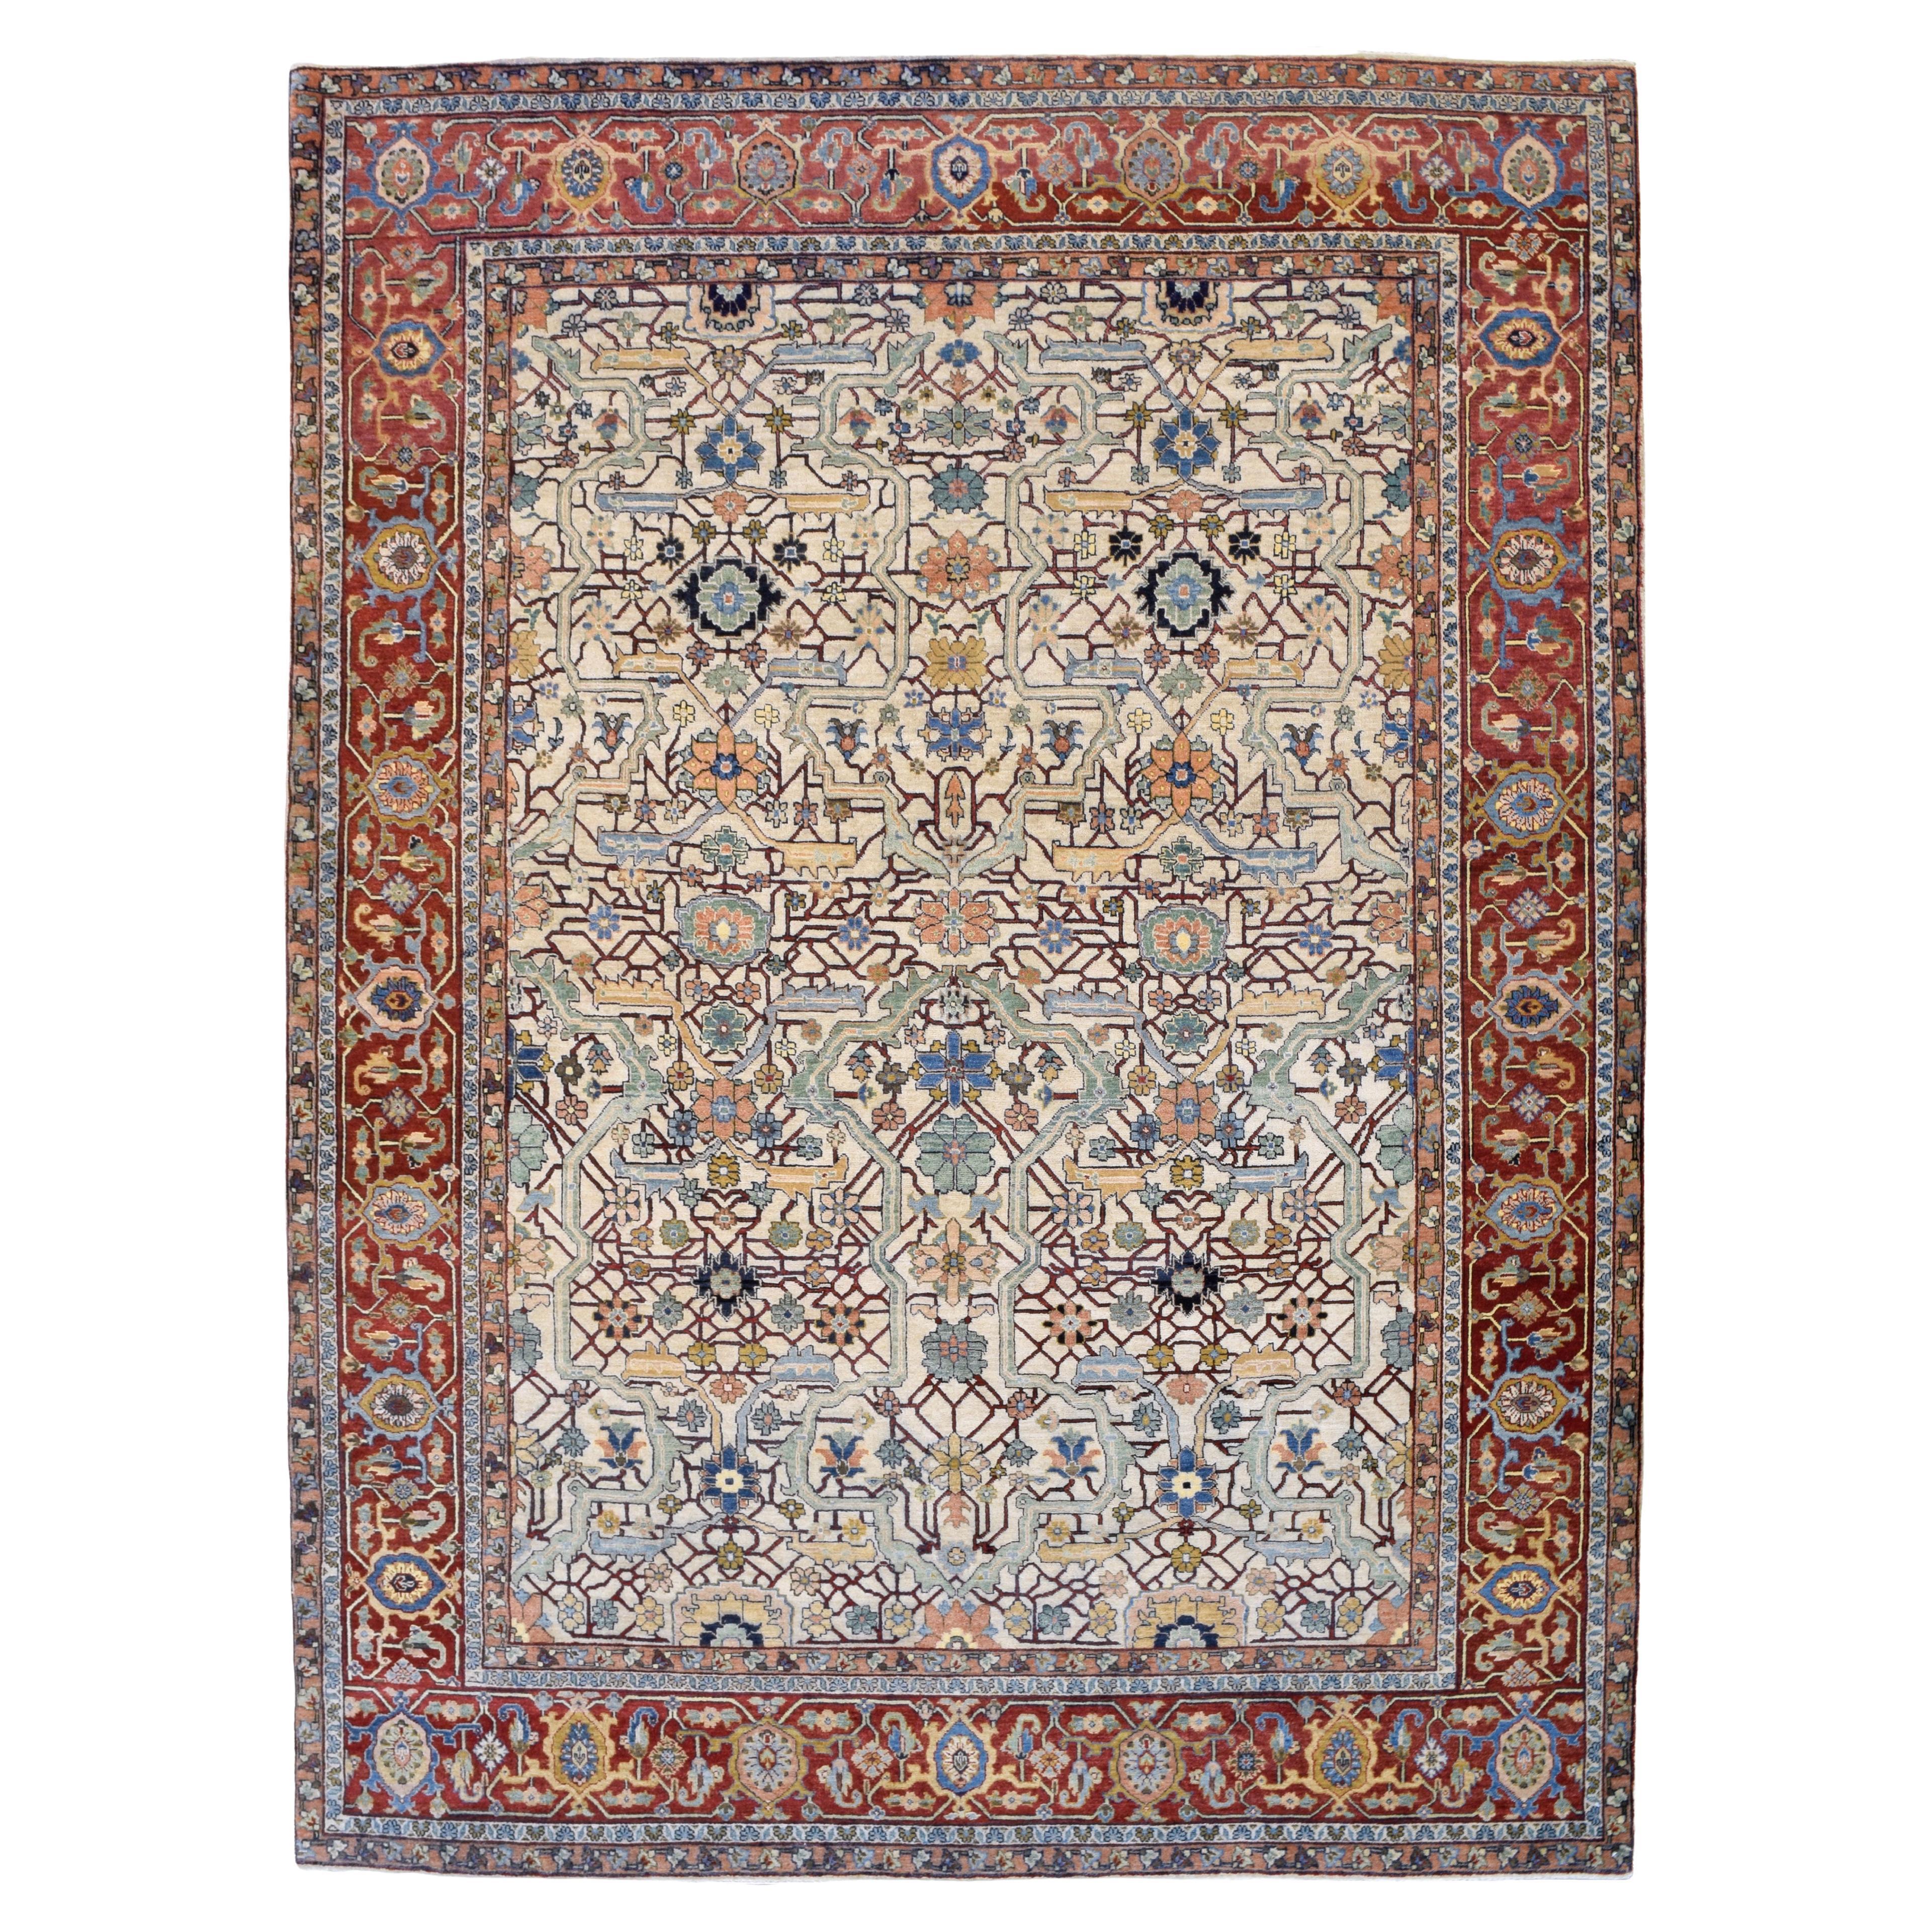 Bright and Colorful Transitional Heriz Serapi Carpet from Orley Shabahang